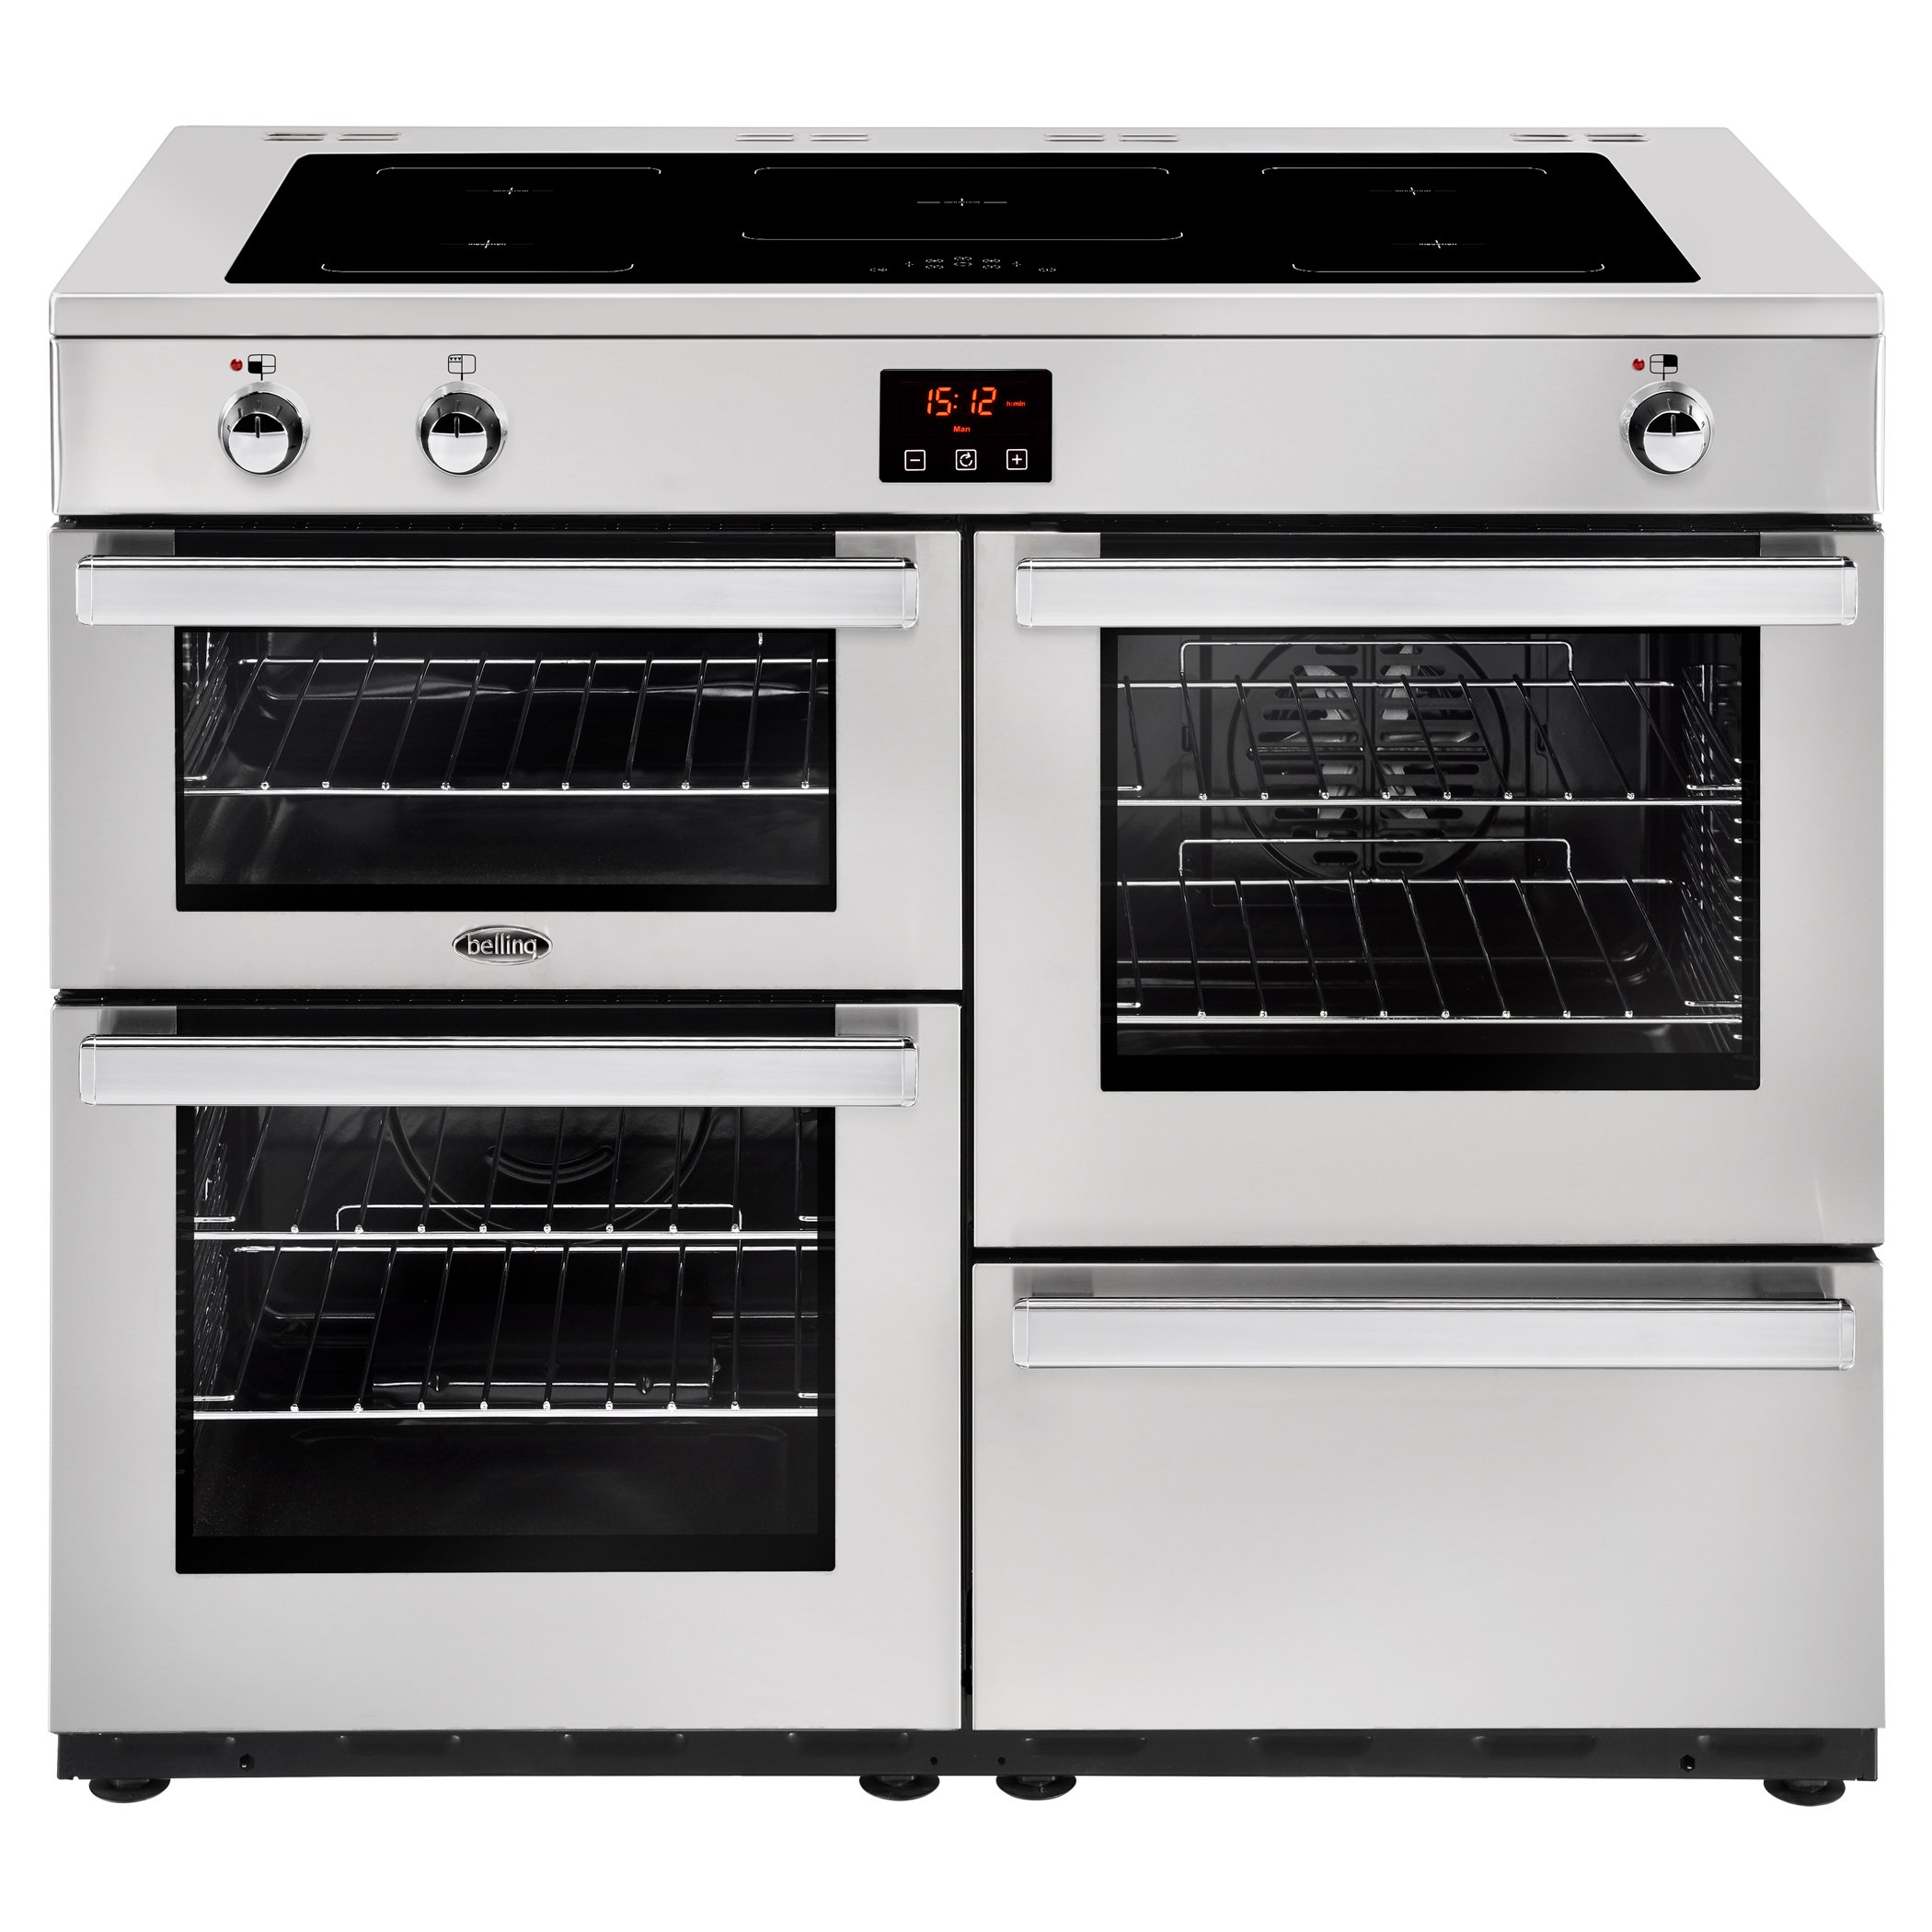 110cm electric range cooker with induction hotplate and smart Link+ technology, Maxi-Clock and easy clean enamel. Requires 32A connection.